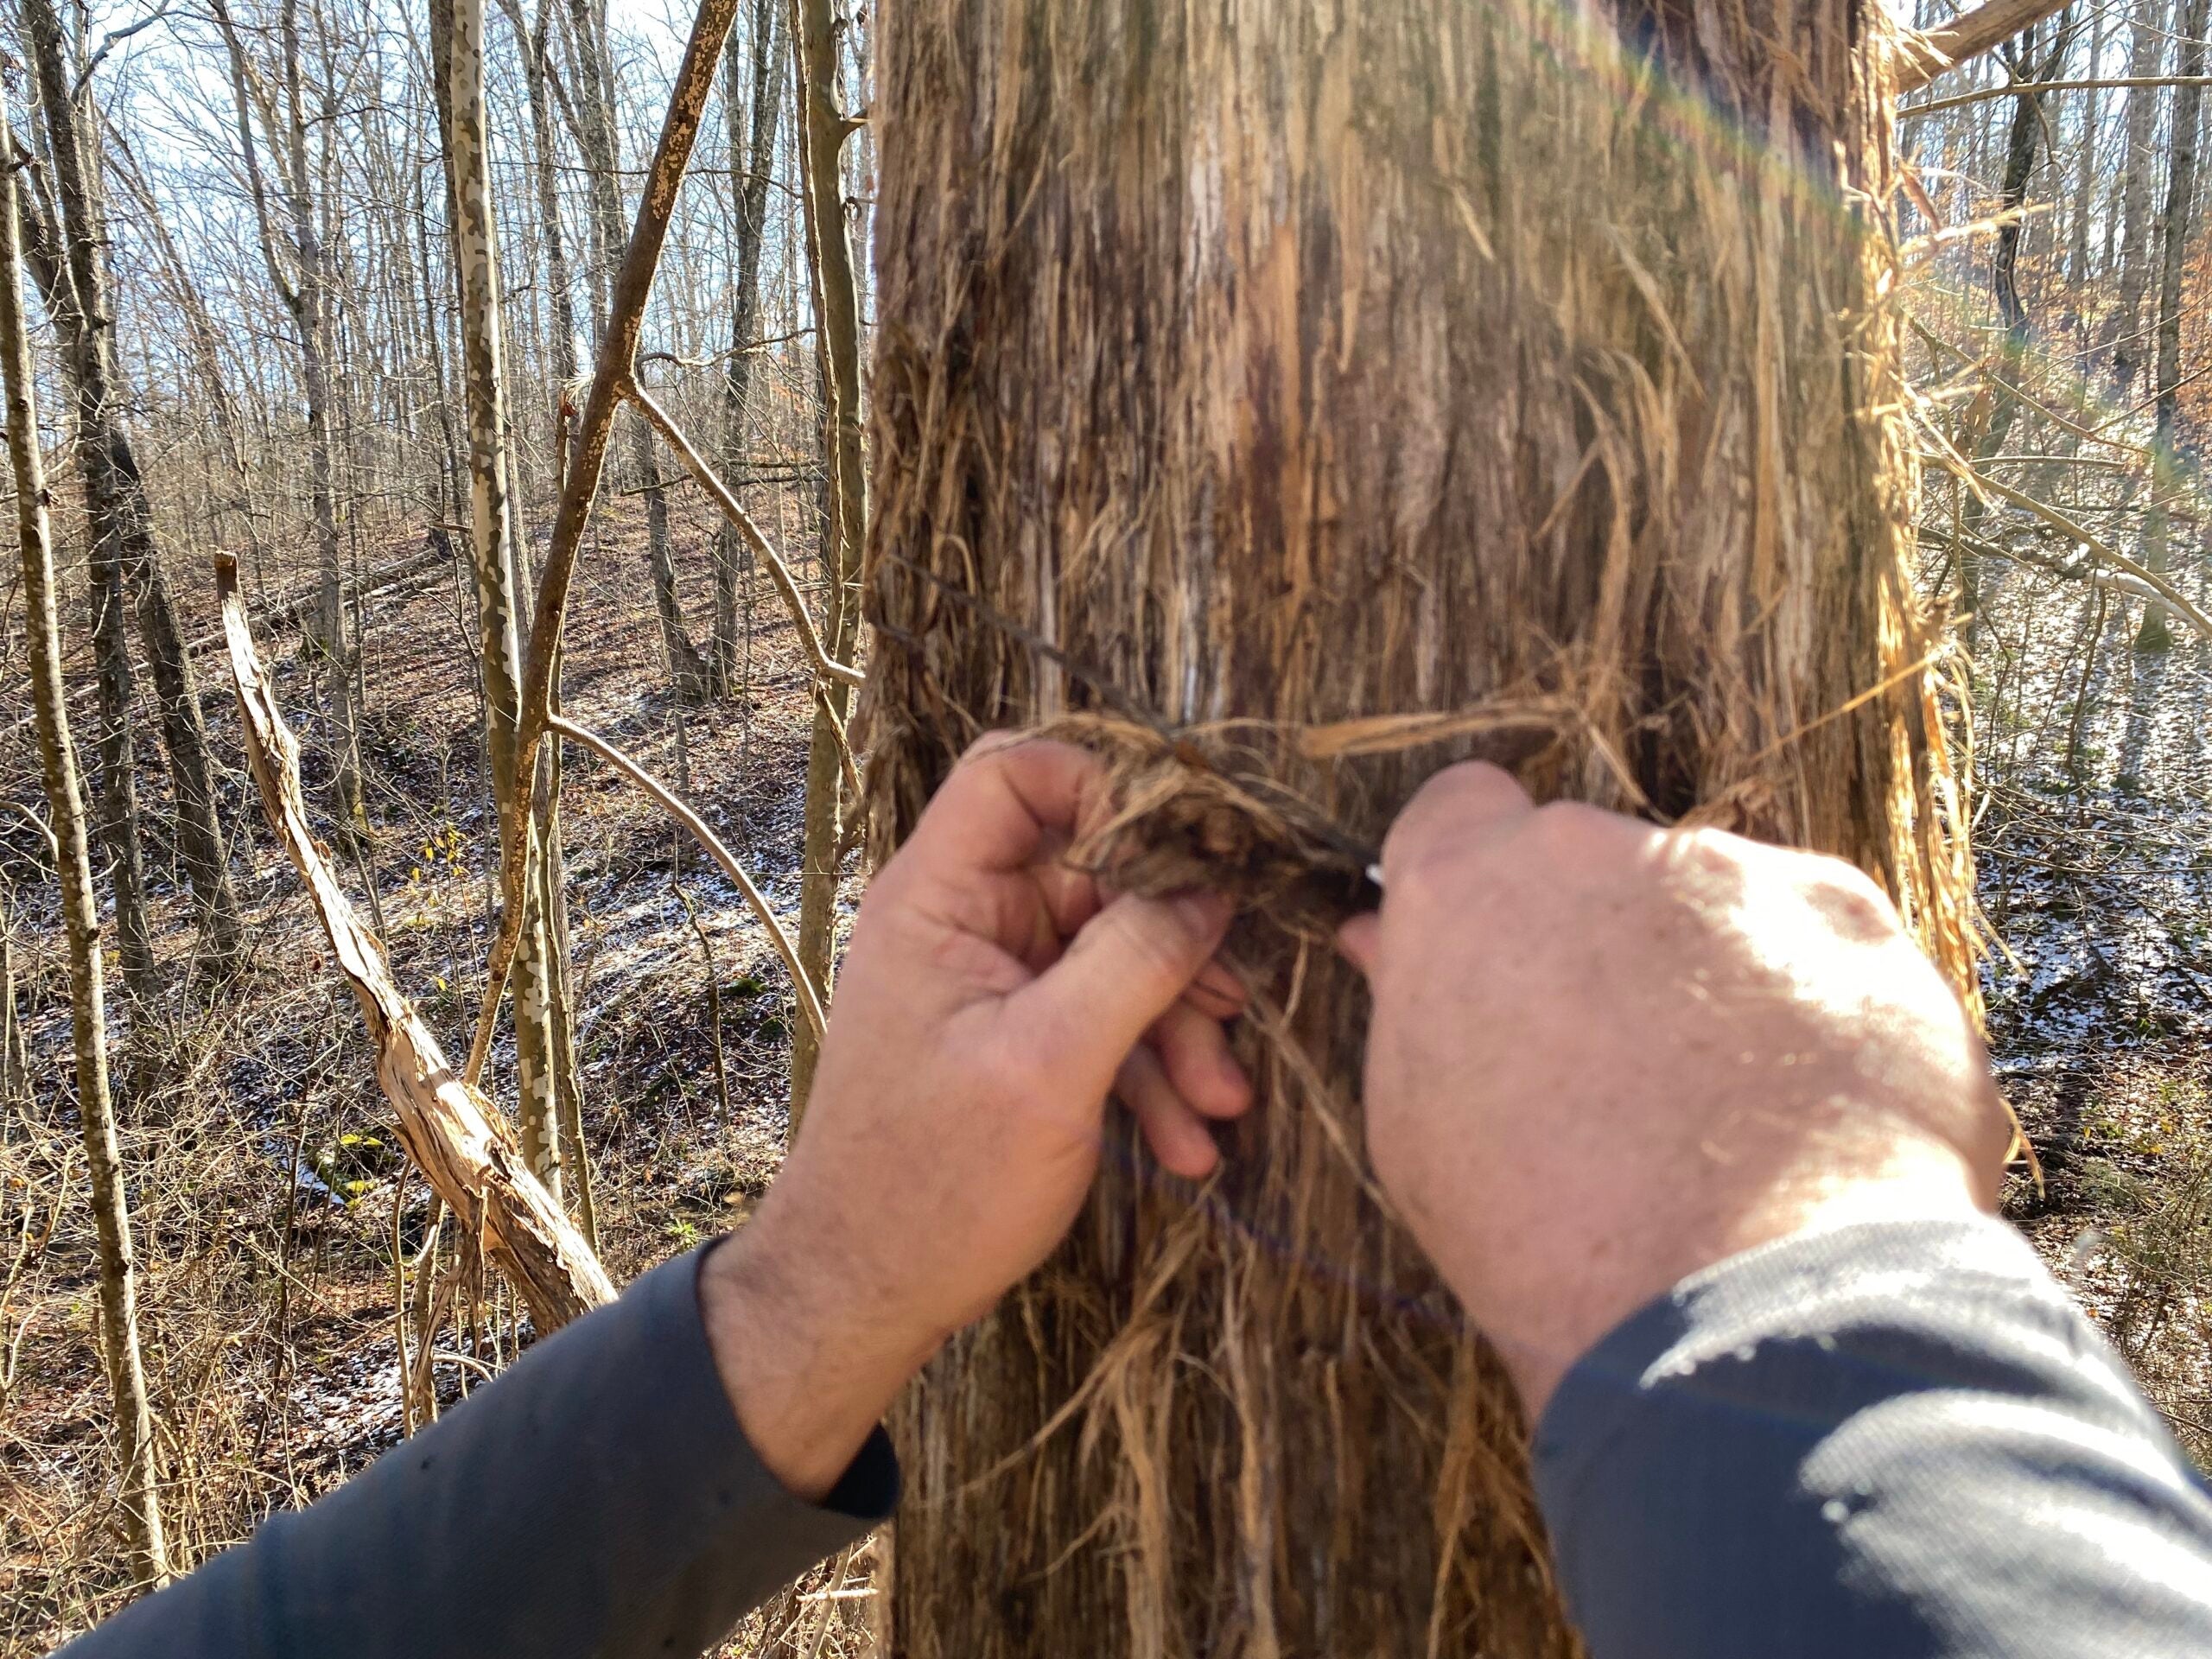 A man uses a knife to shave bark from a cedar tree to use for a campfire.